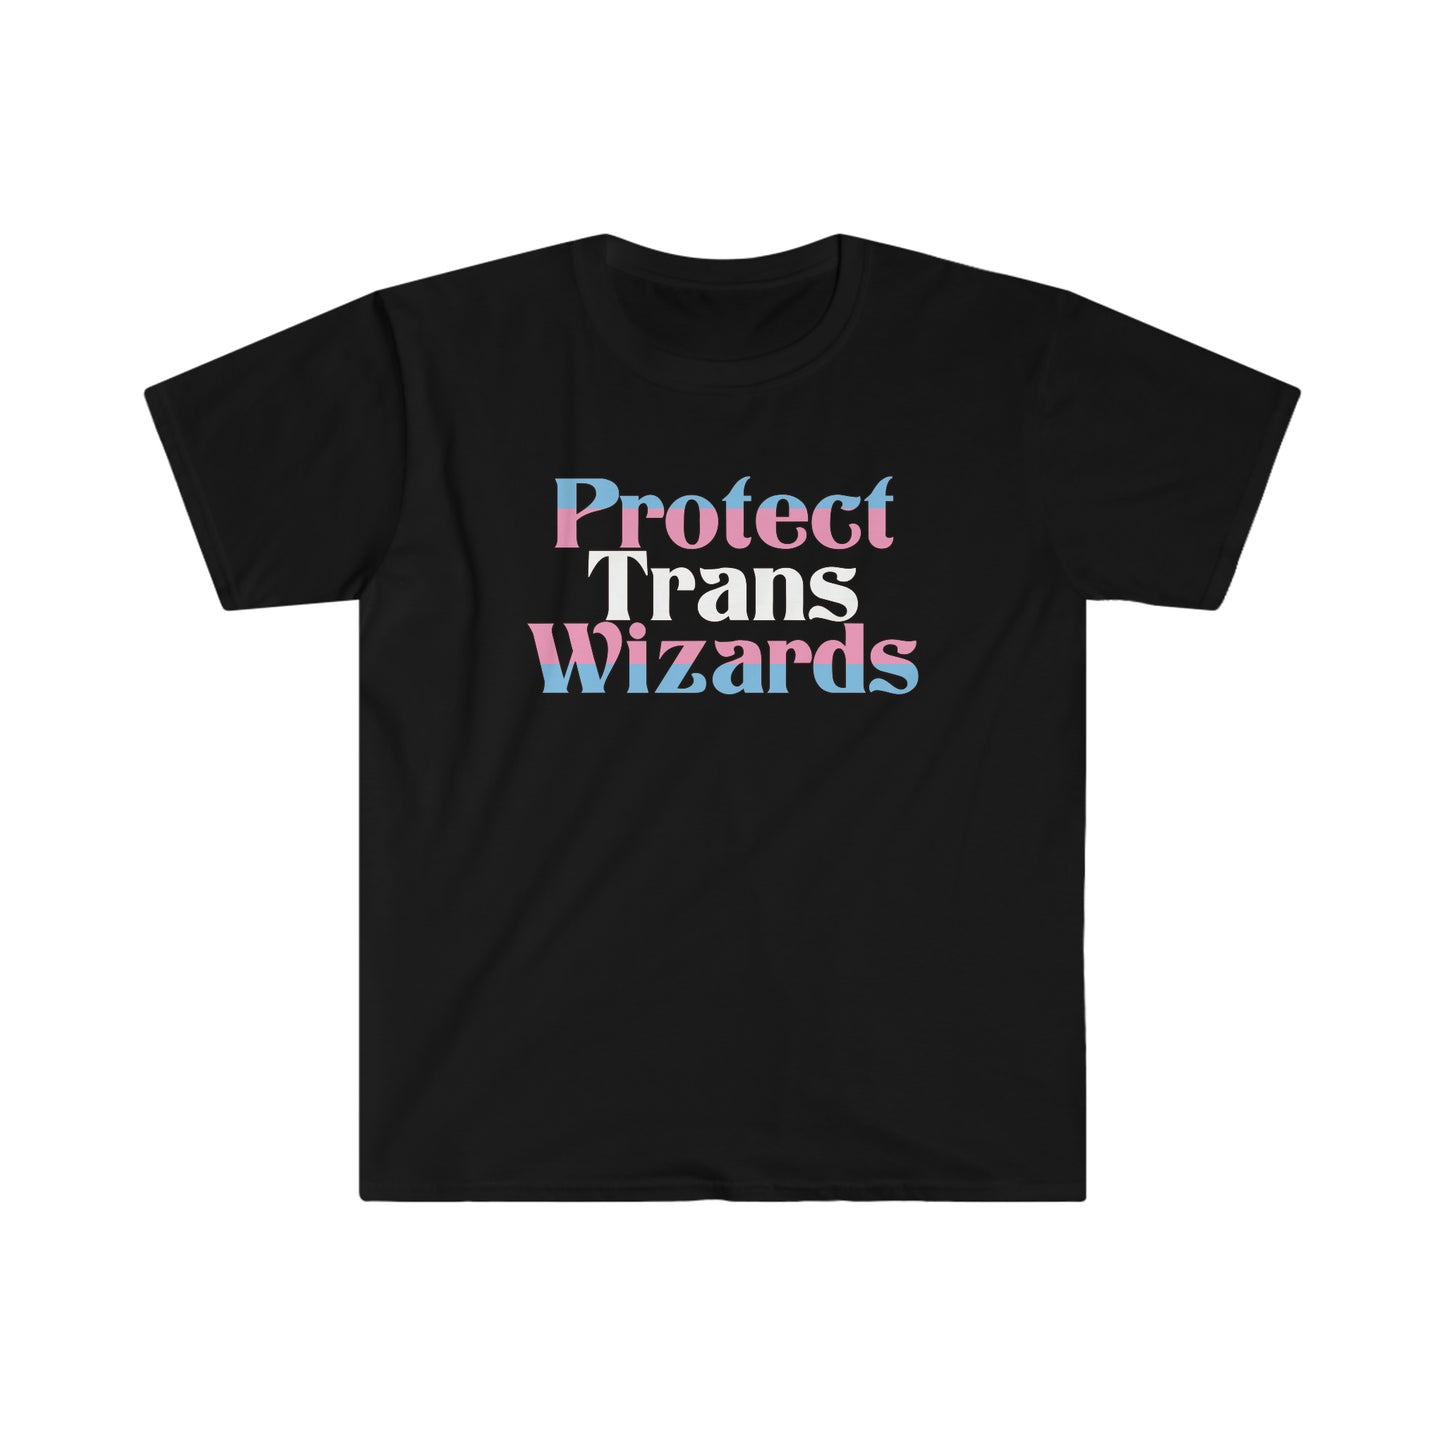 Protect Trans Wizards